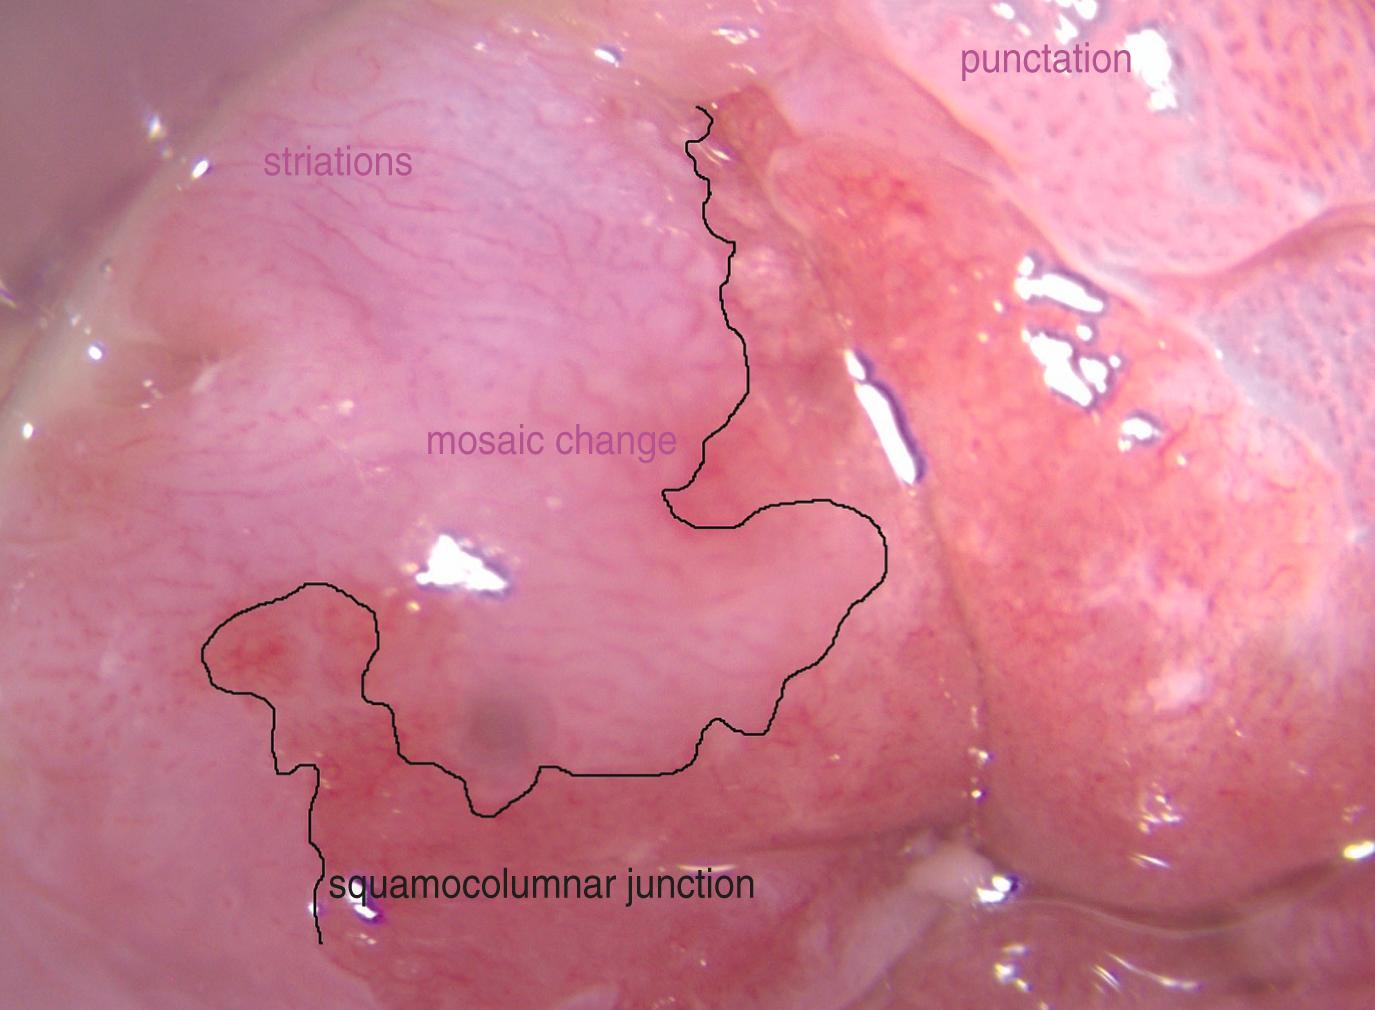 Figure 8.7, High-resolution anoscopy (HRA) image showing high-grade squamous intra-epithelial lesion (HSIL) and squamocolumnar junction (SCJ).